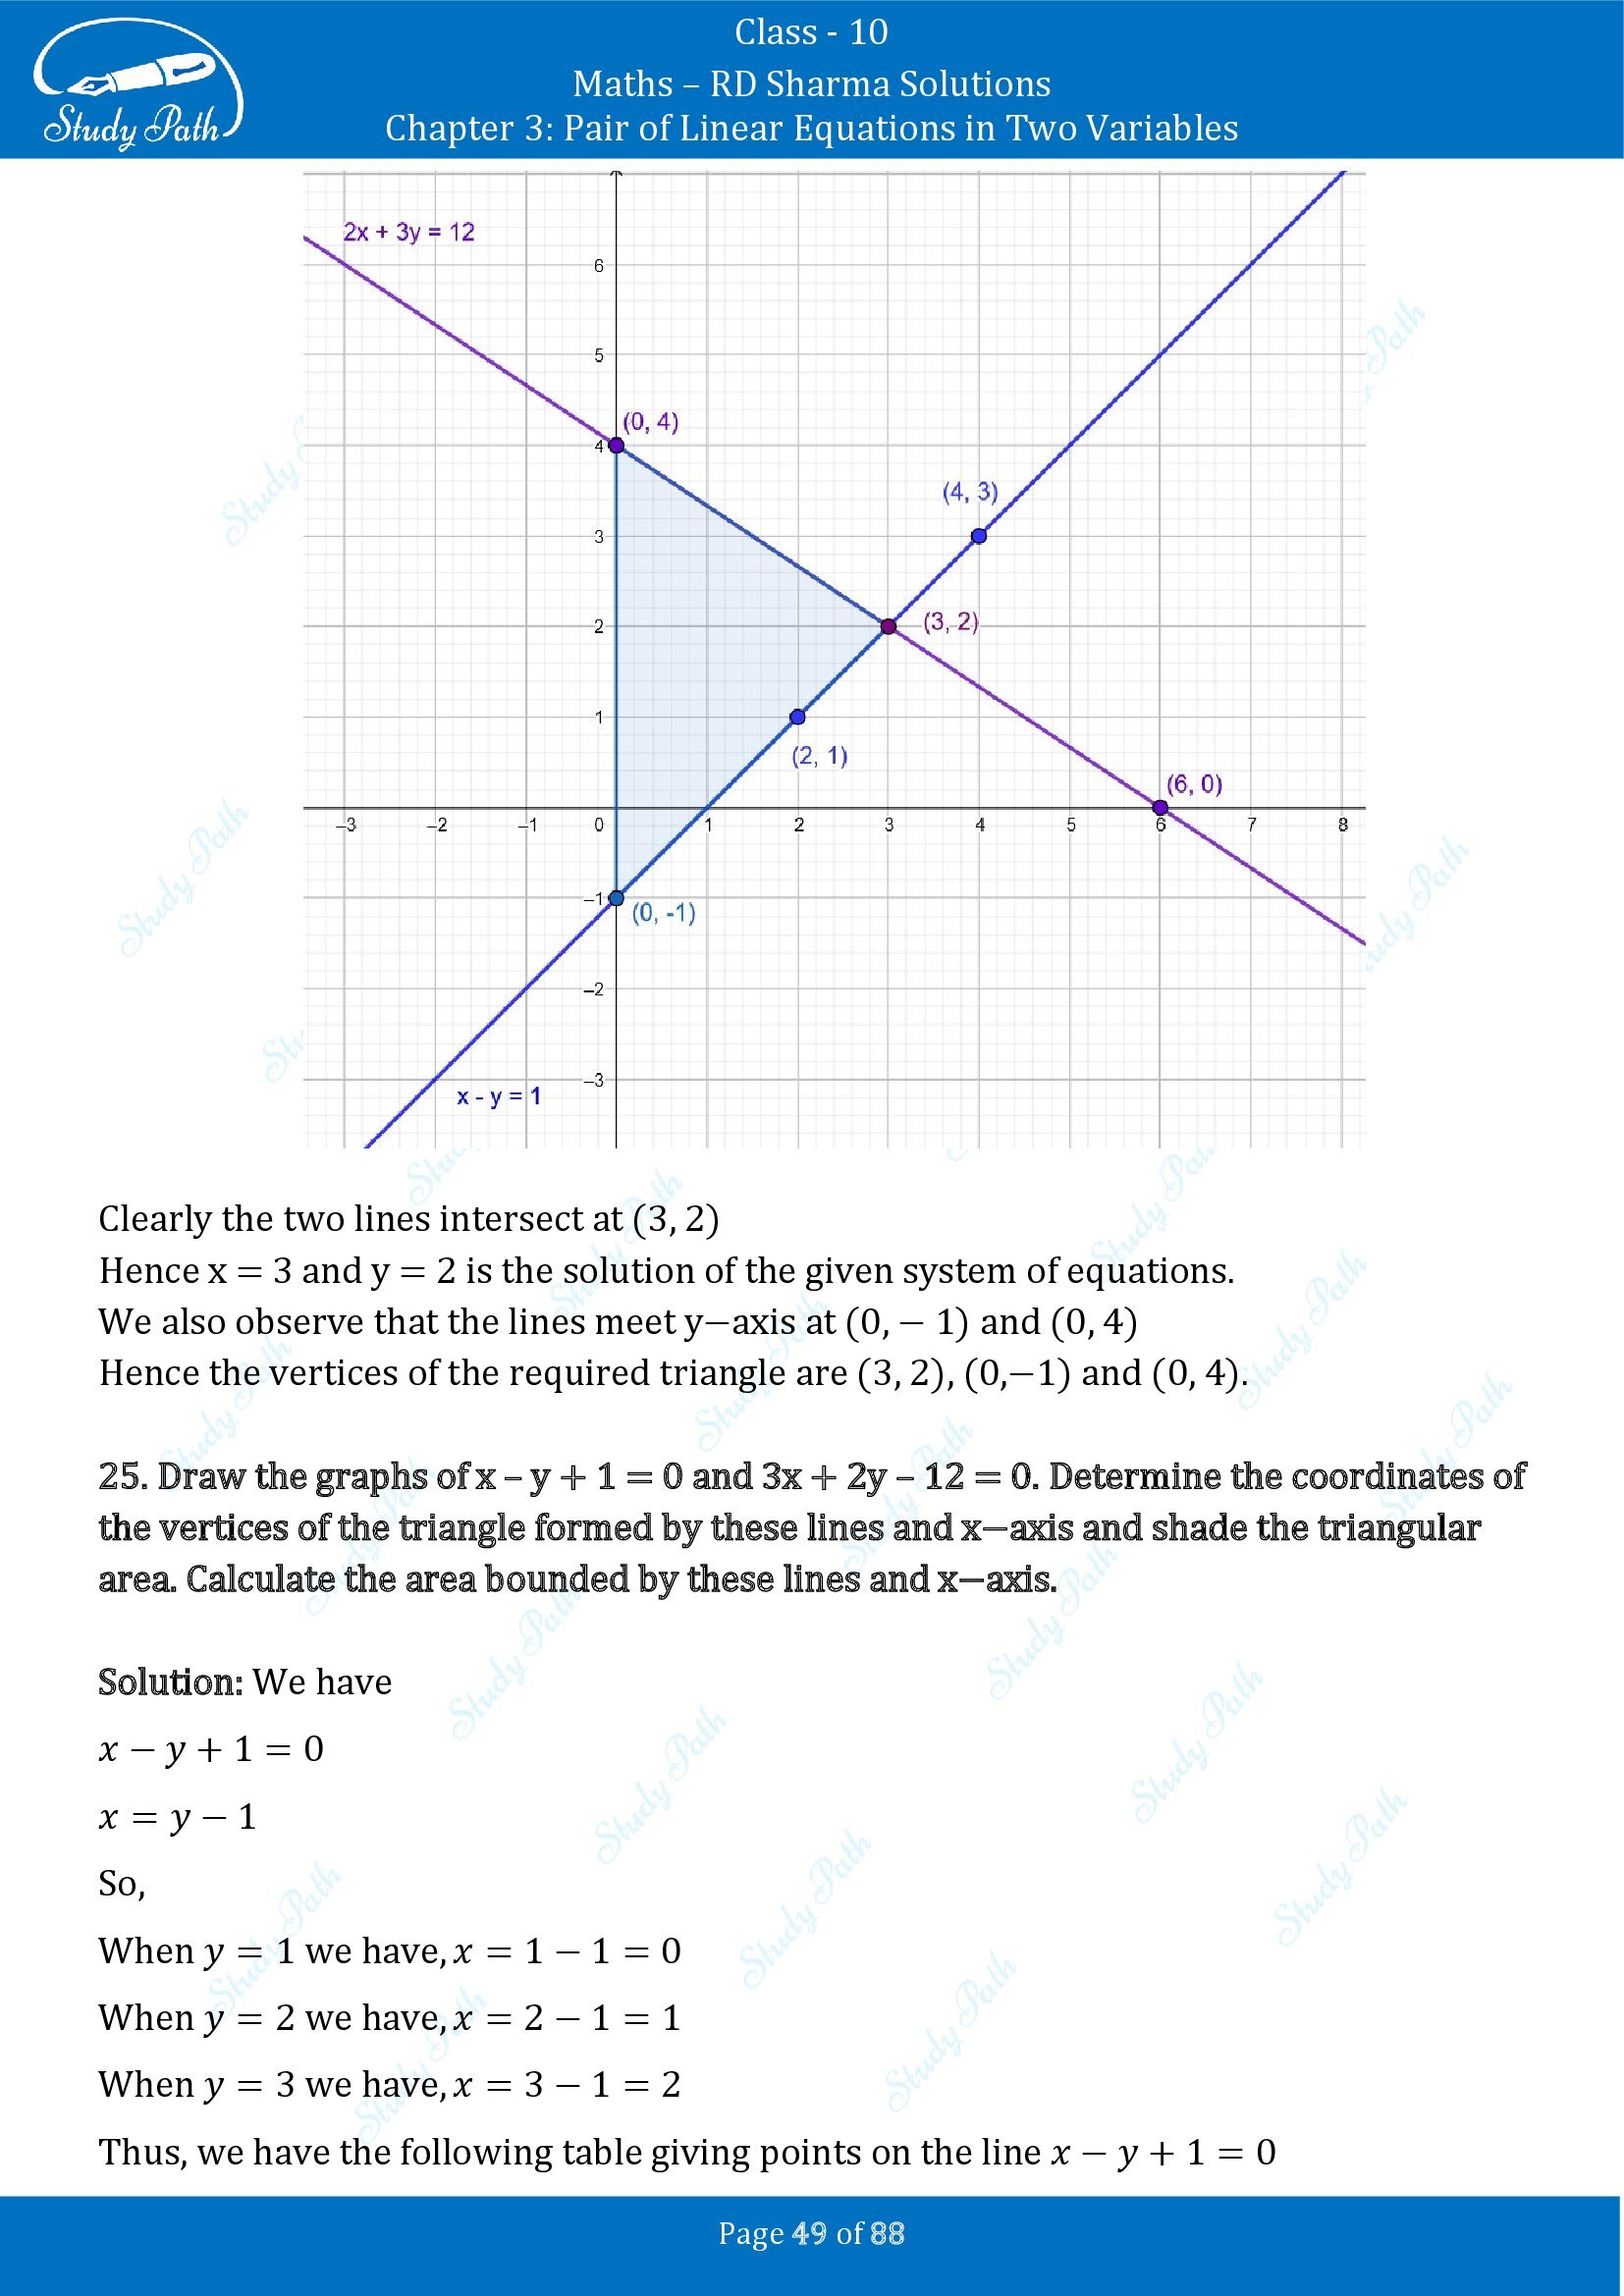 RD Sharma Solutions Class 10 Chapter 3 Pair of Linear Equations in Two Variables Exercise 3.2 00049